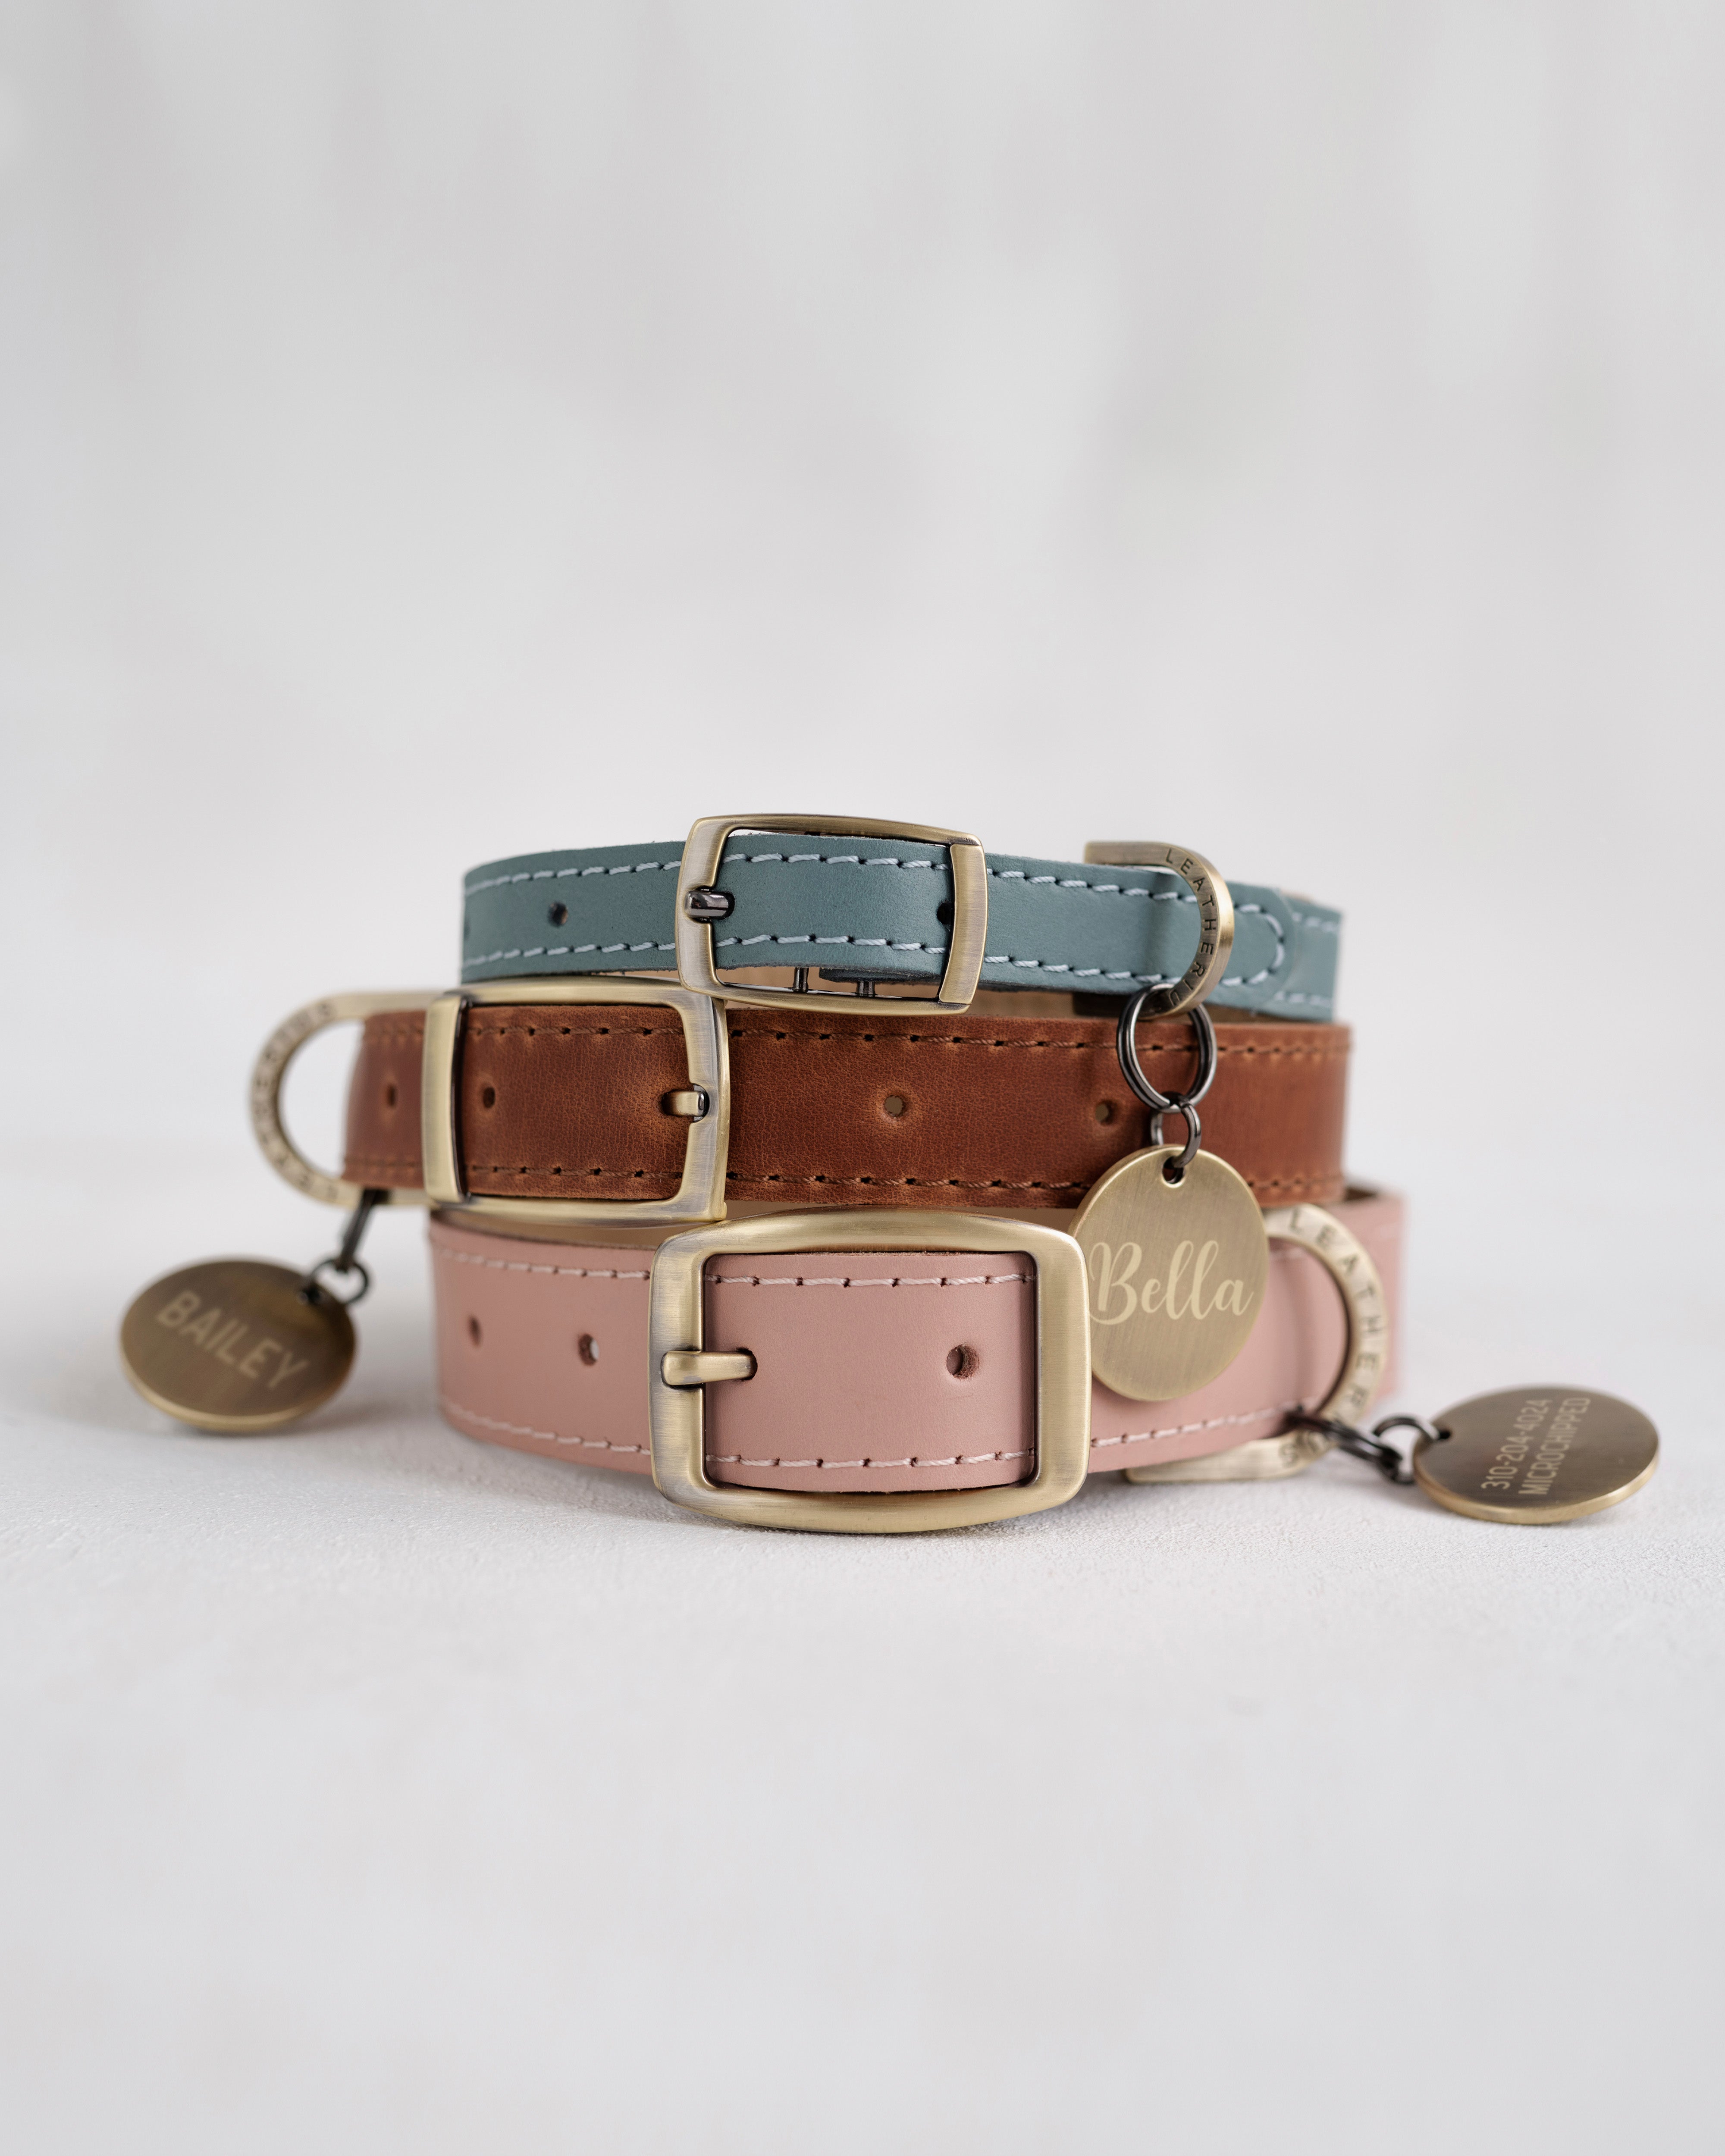 Leather dog collar personalized